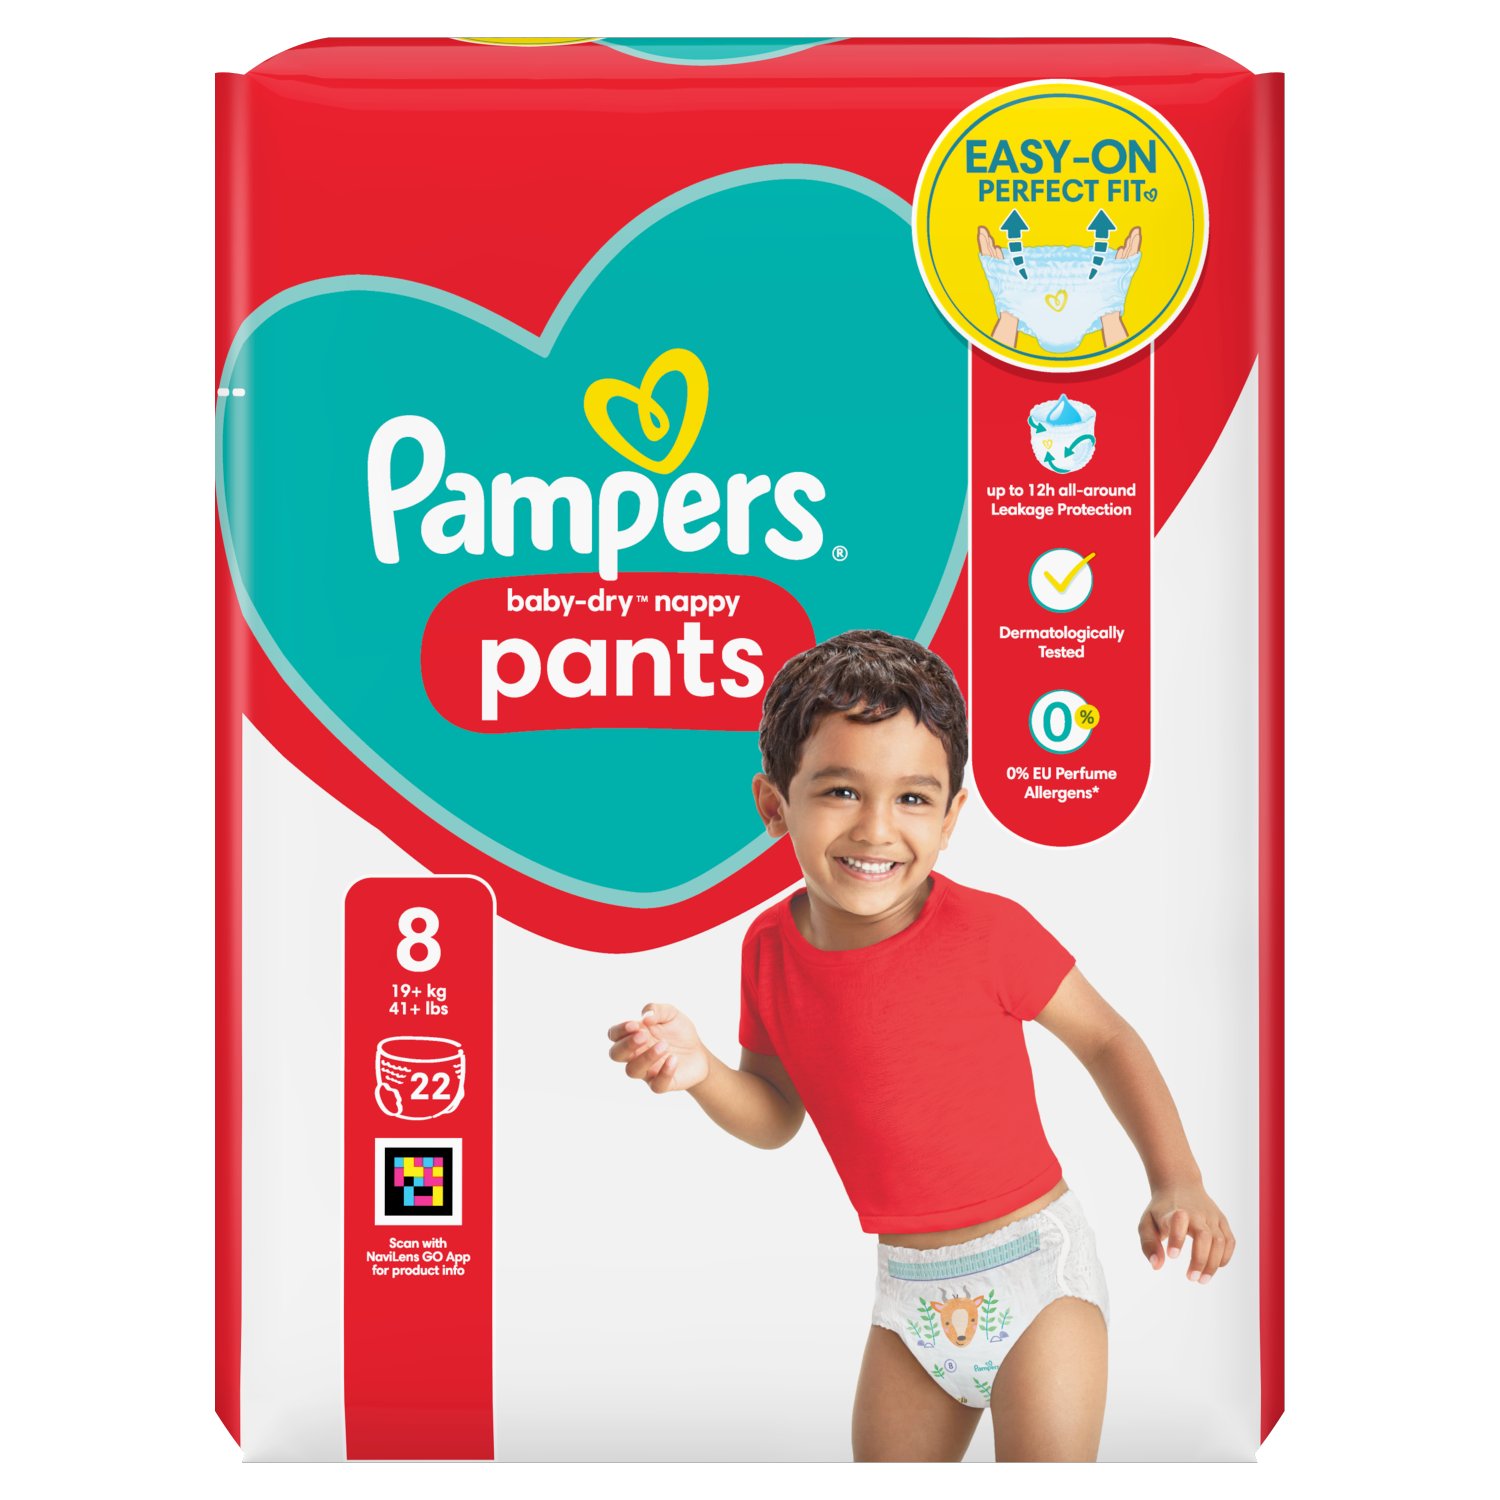 Pampers Baby Dry Nappy Pants Size 8 Essential Pack (22 Piece)